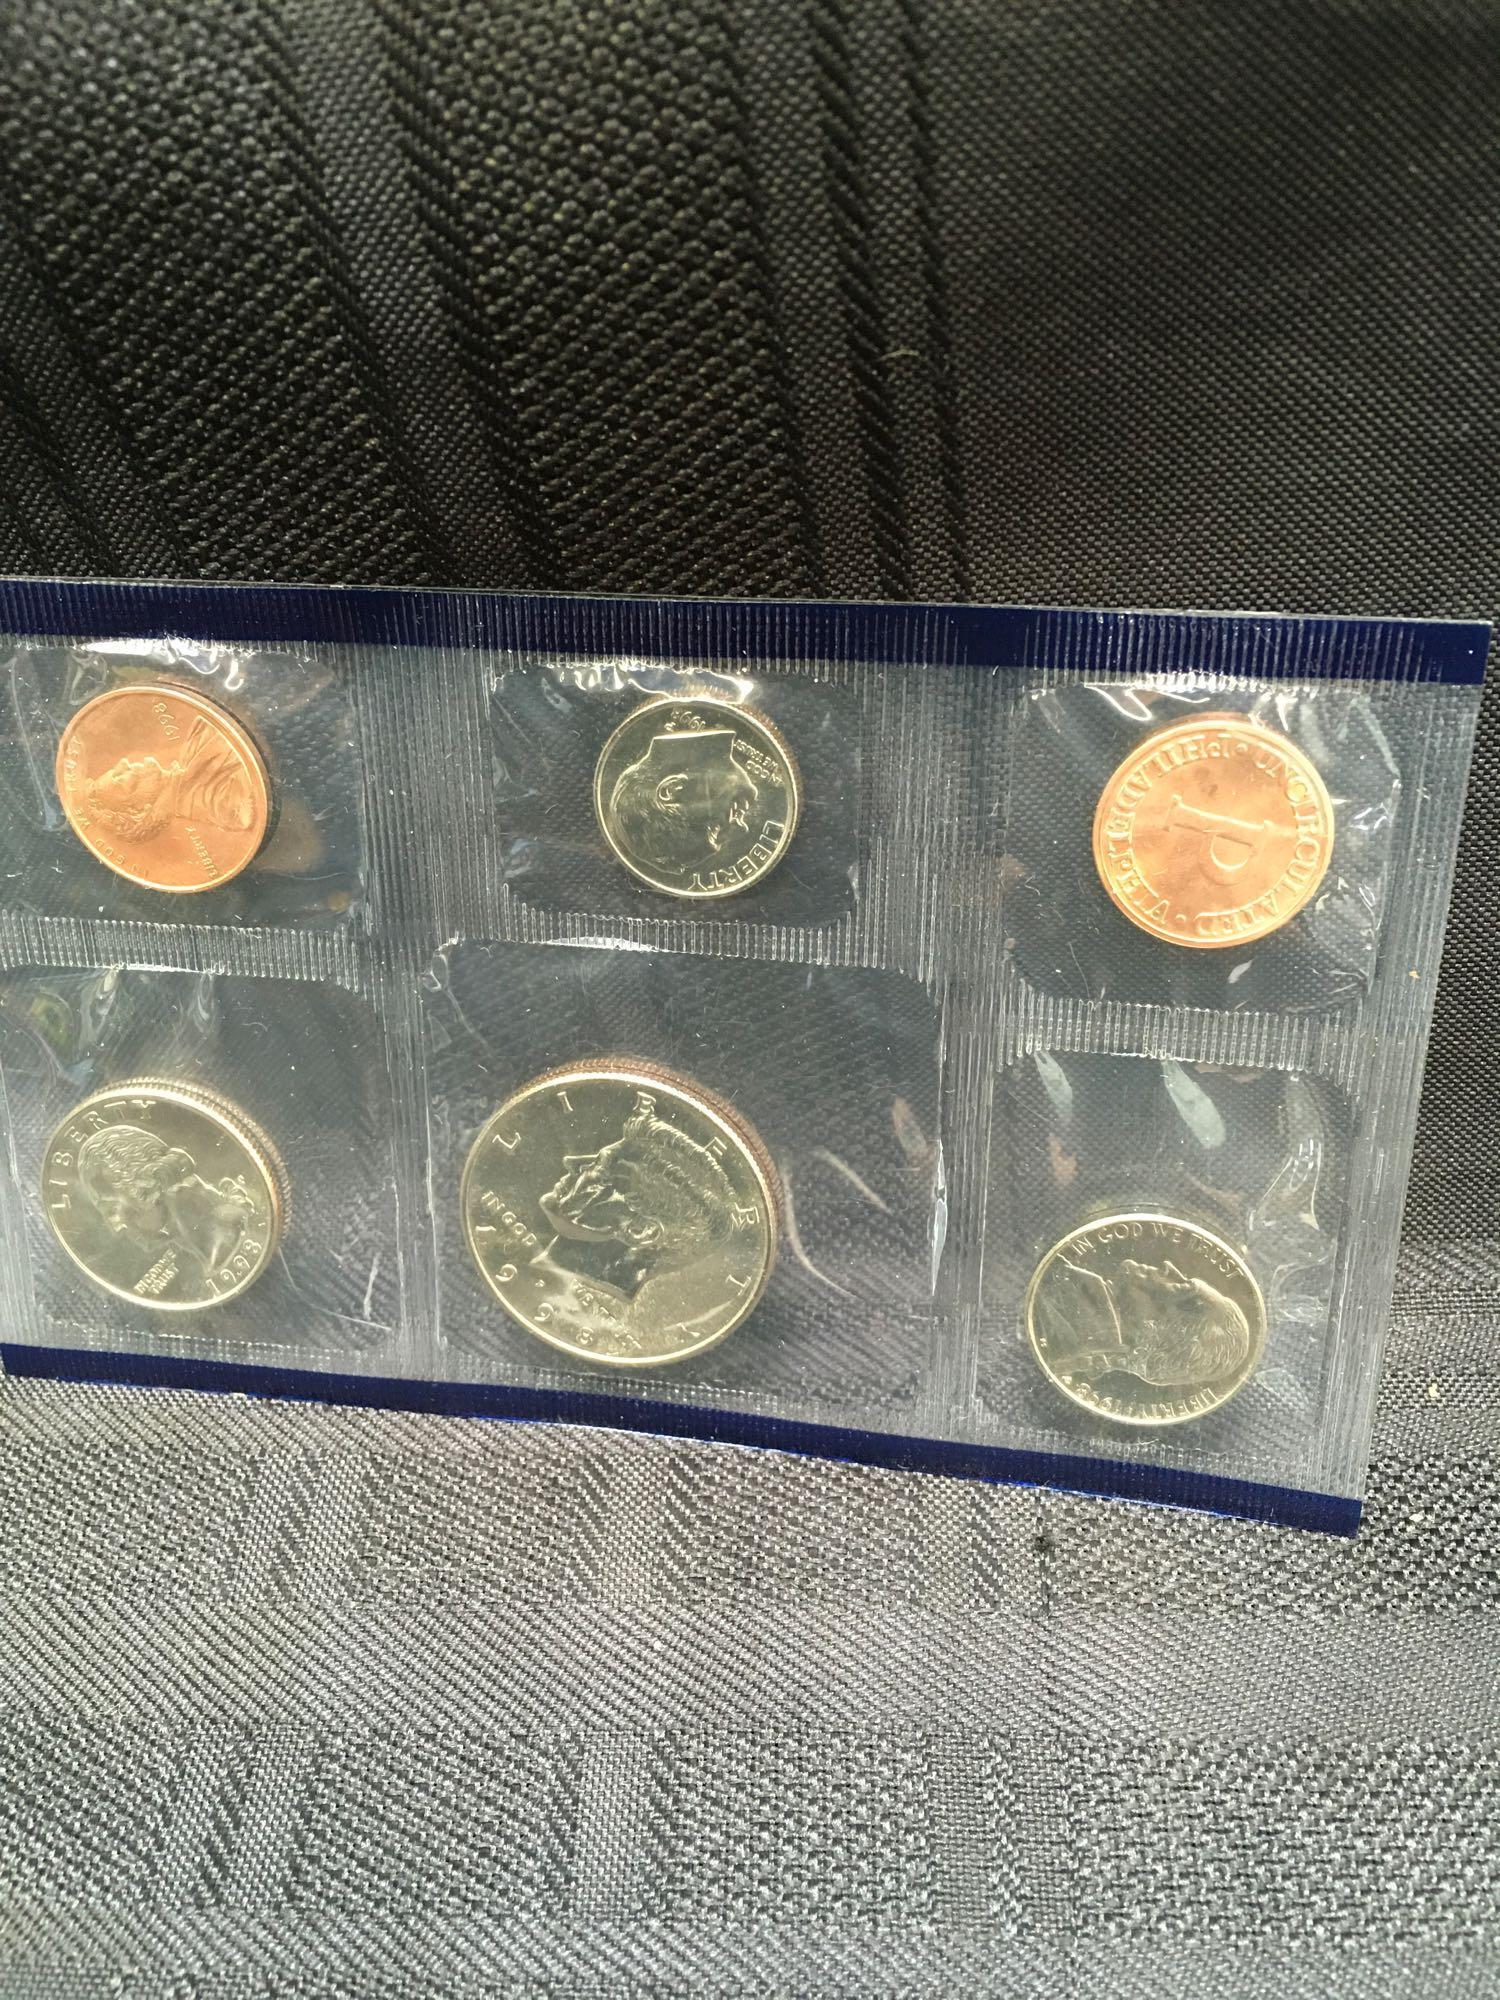 United States Uncirculated Coins  4 Mint sets. 1996 D, 1996 P, 1998 D, 1998